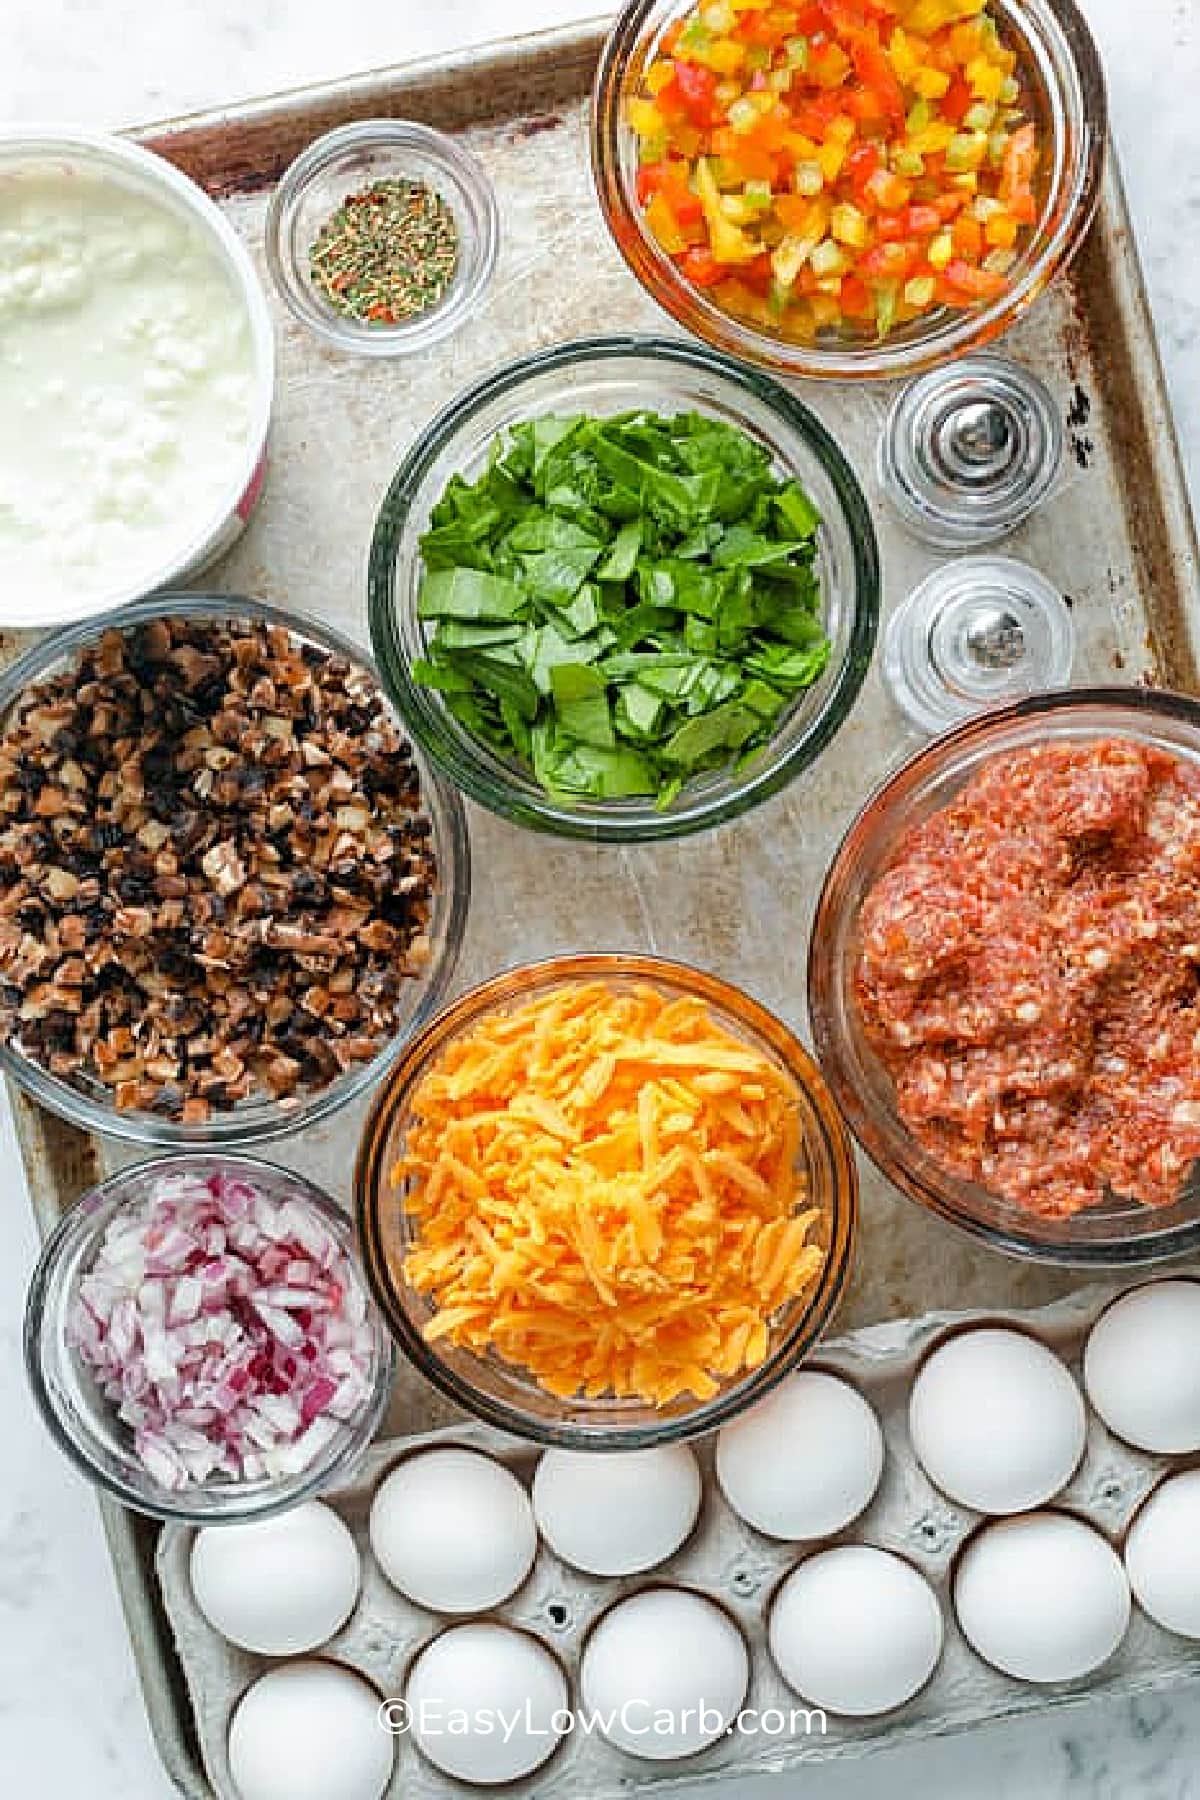 ingredients to make sausage egg casserole including cottage cheese, cheddar, spinach, onions, bell pepper, Italian seasoning, sausage, and eggs